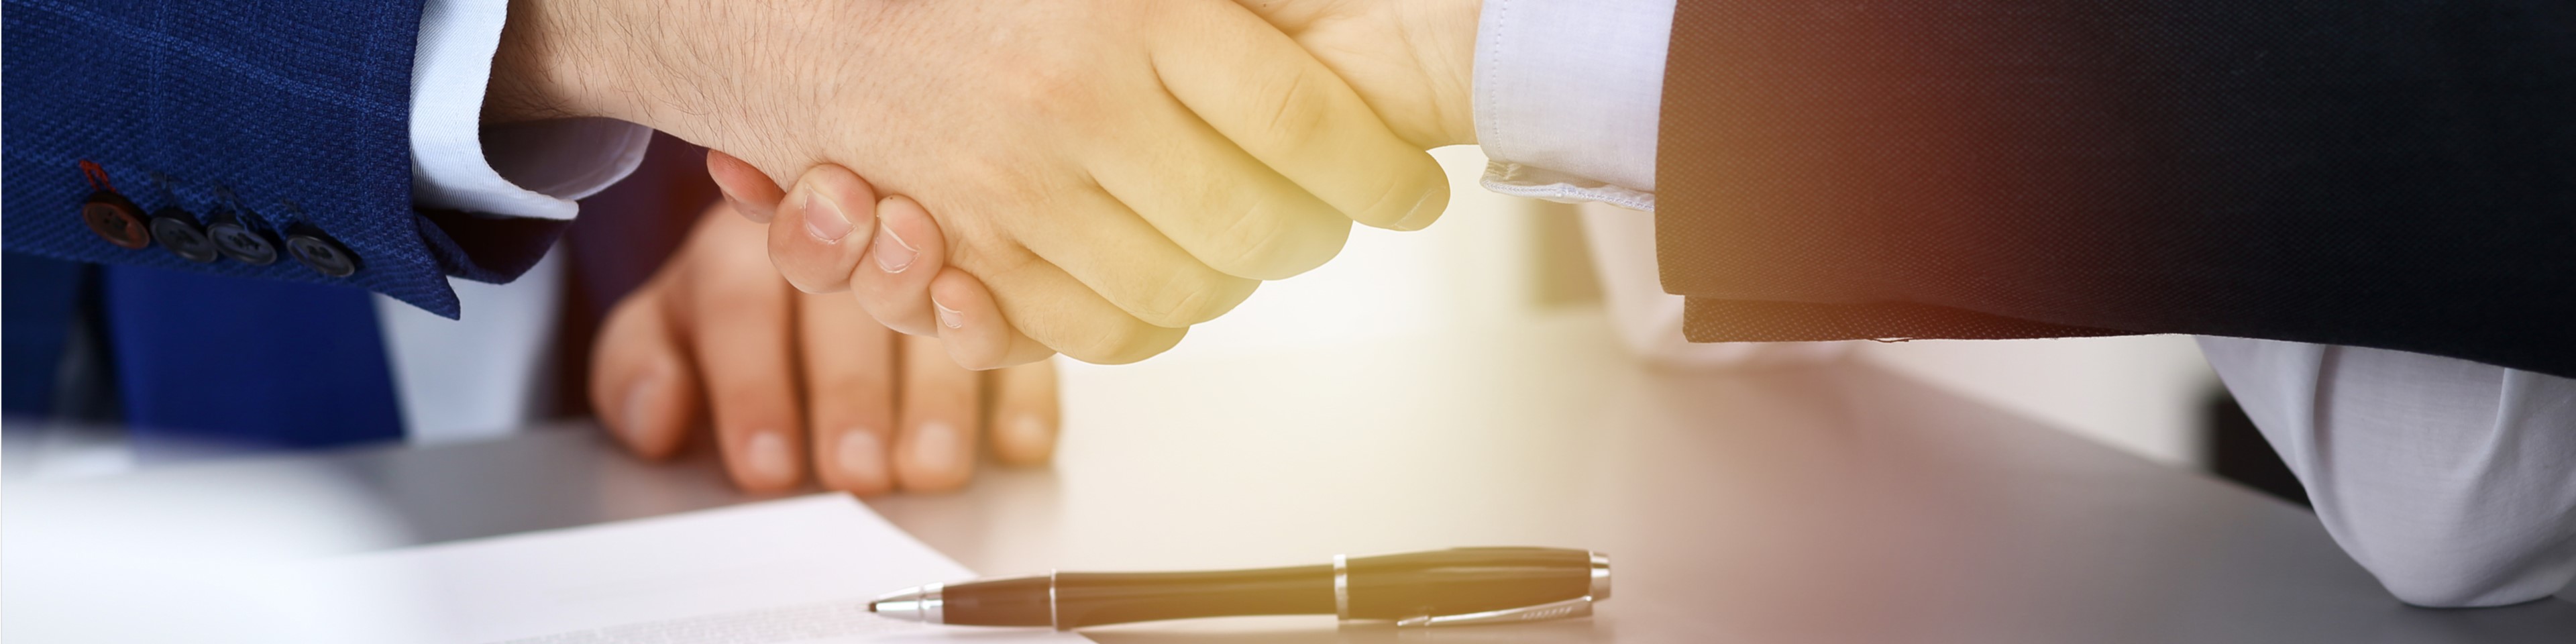 Business people meeting shaking hands in agreement signing papers